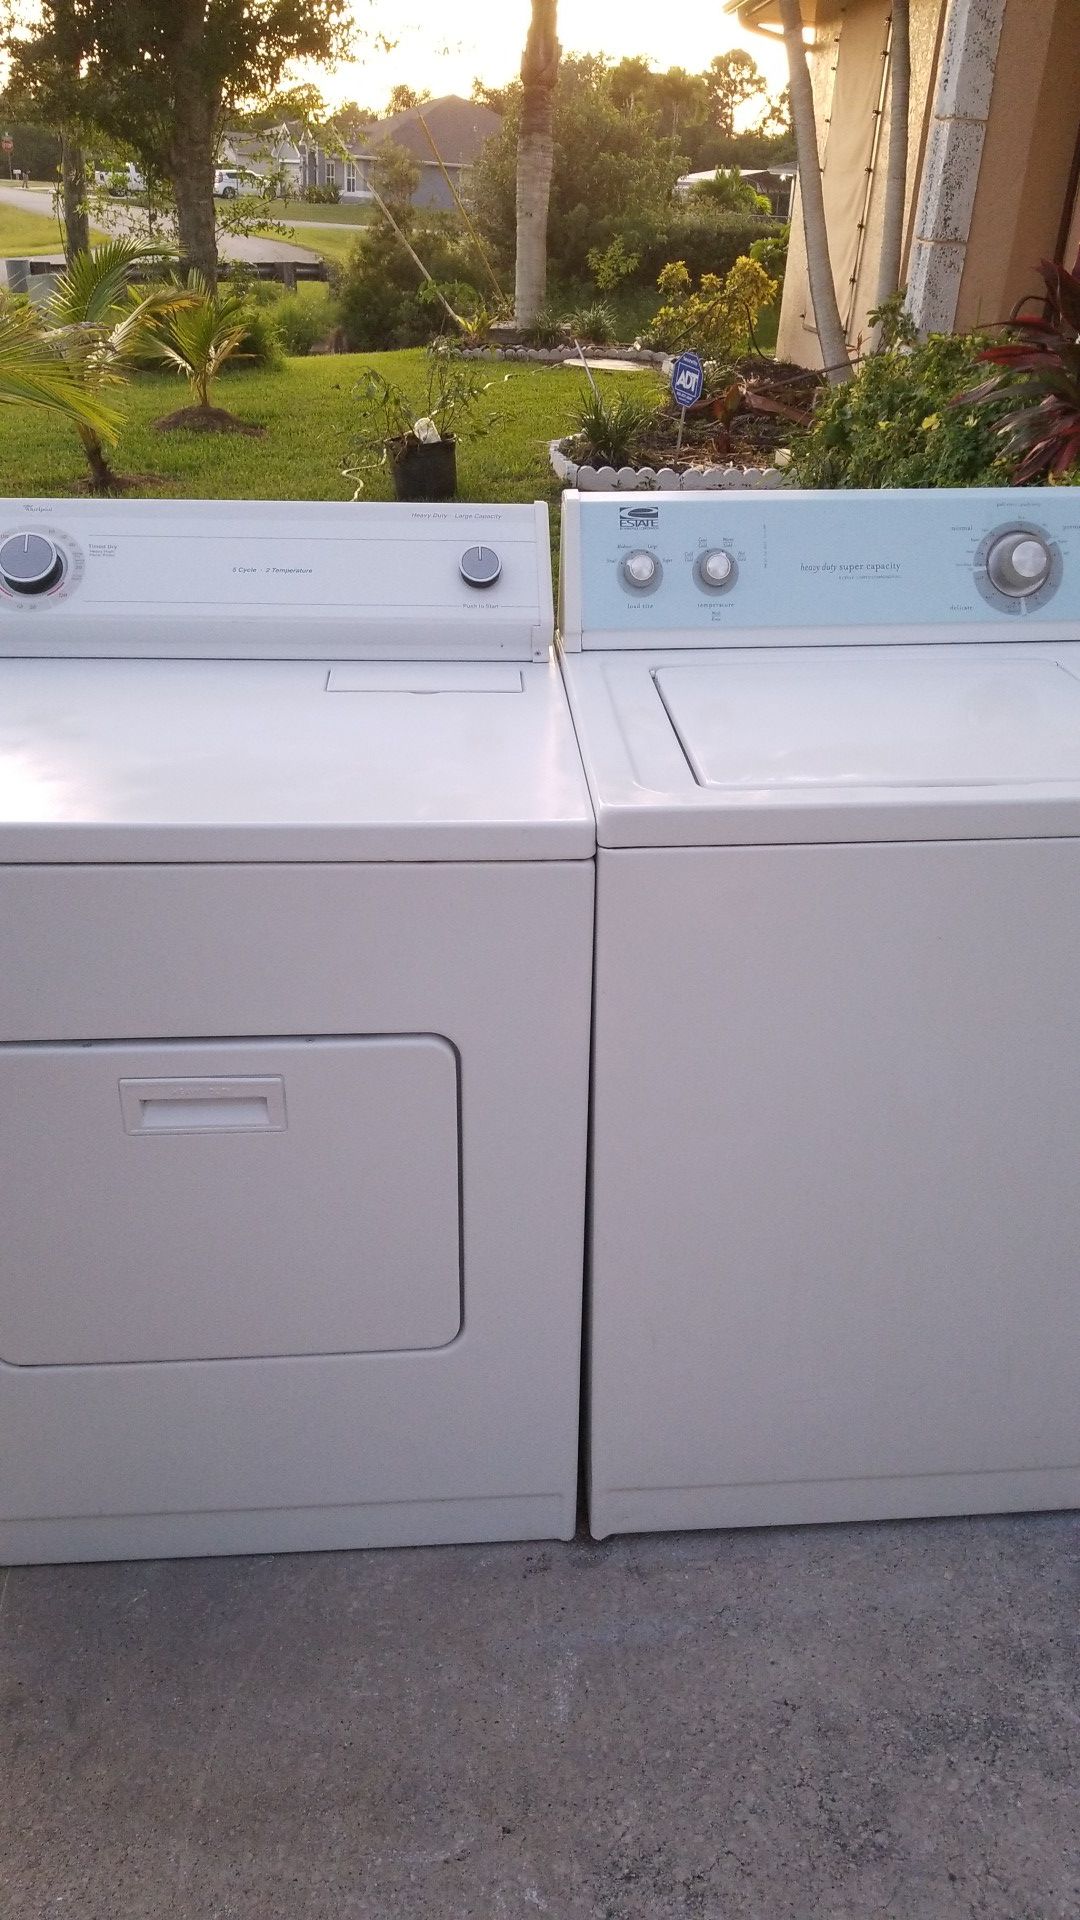 Super Super nice Whirlpool washer and dryer set